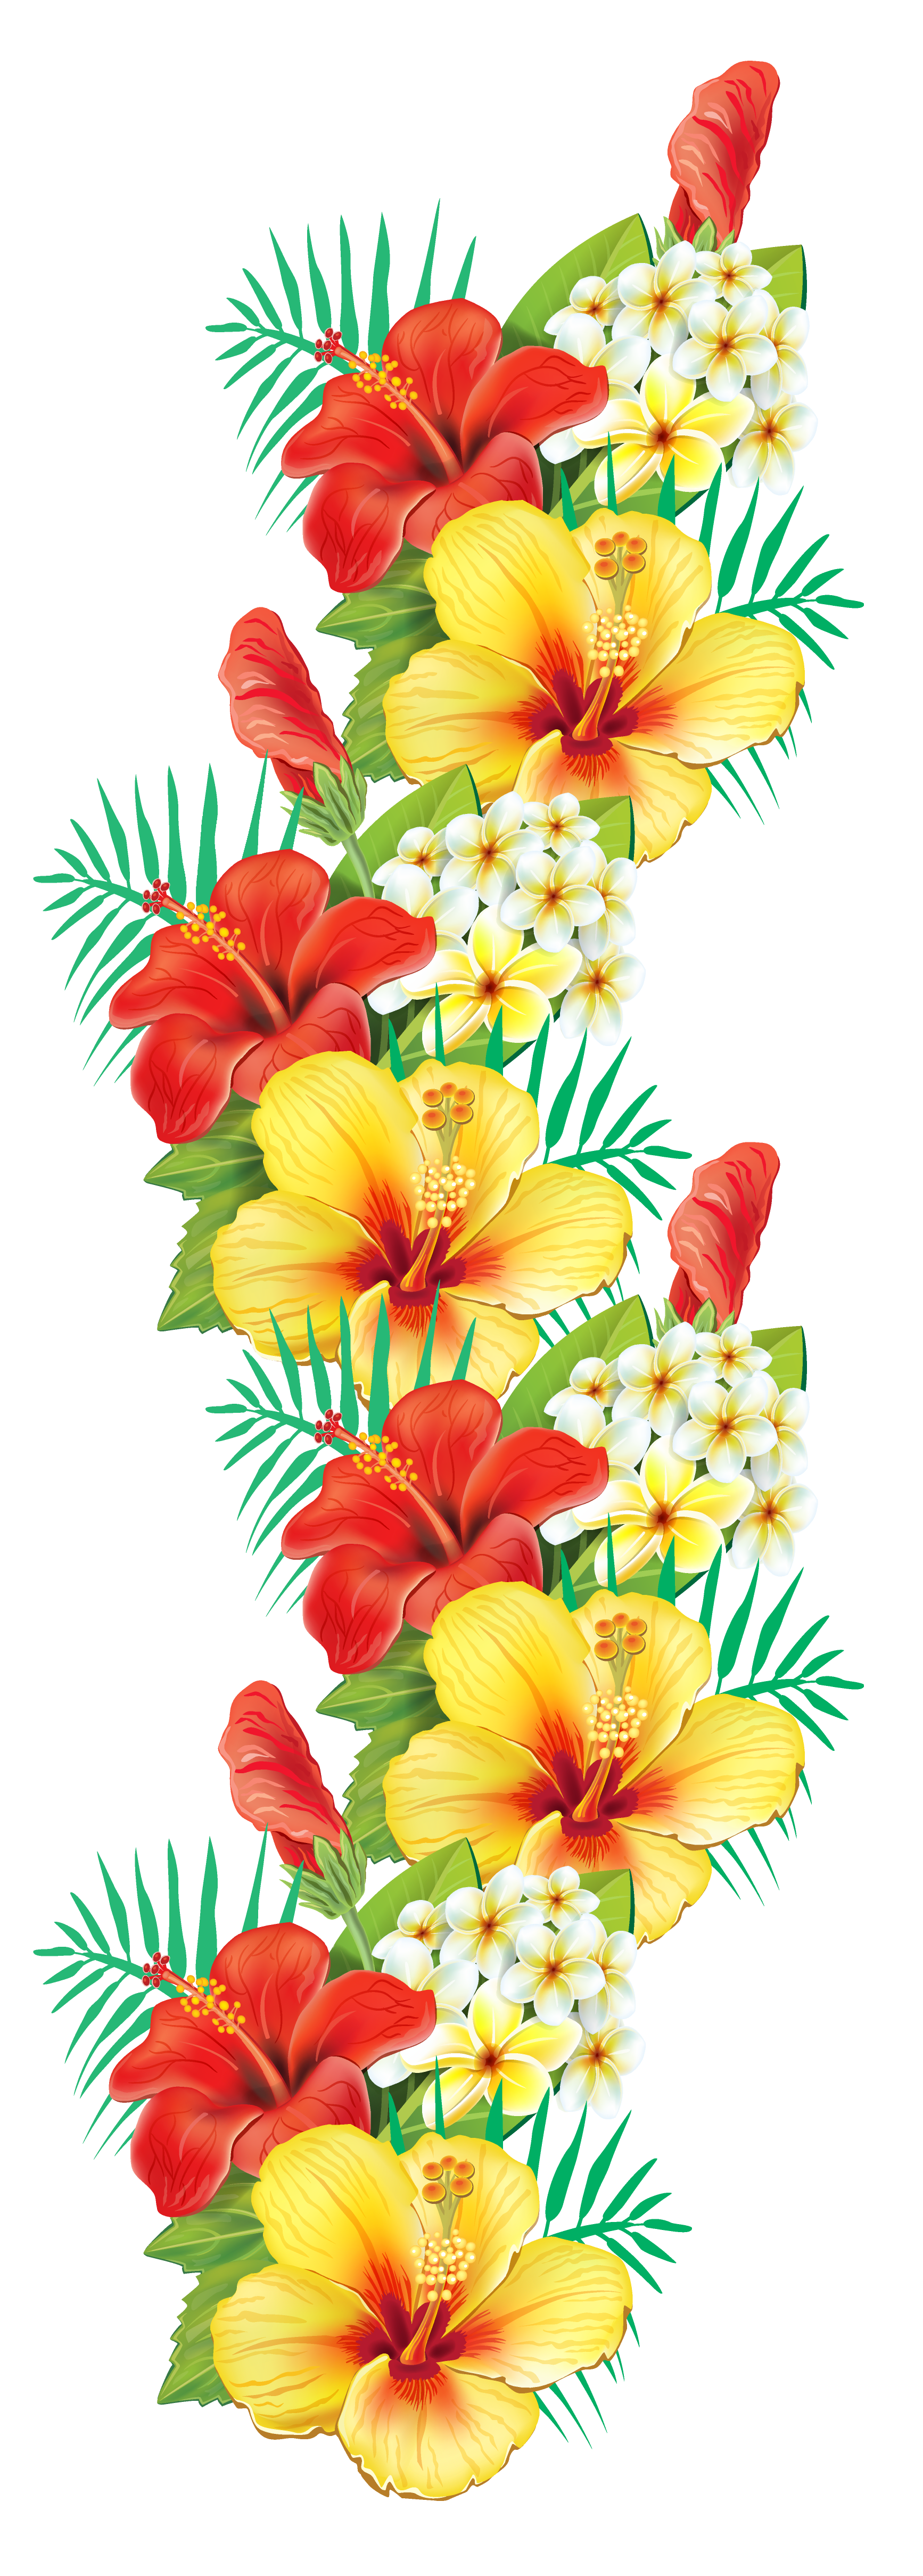 hawaii clipart background